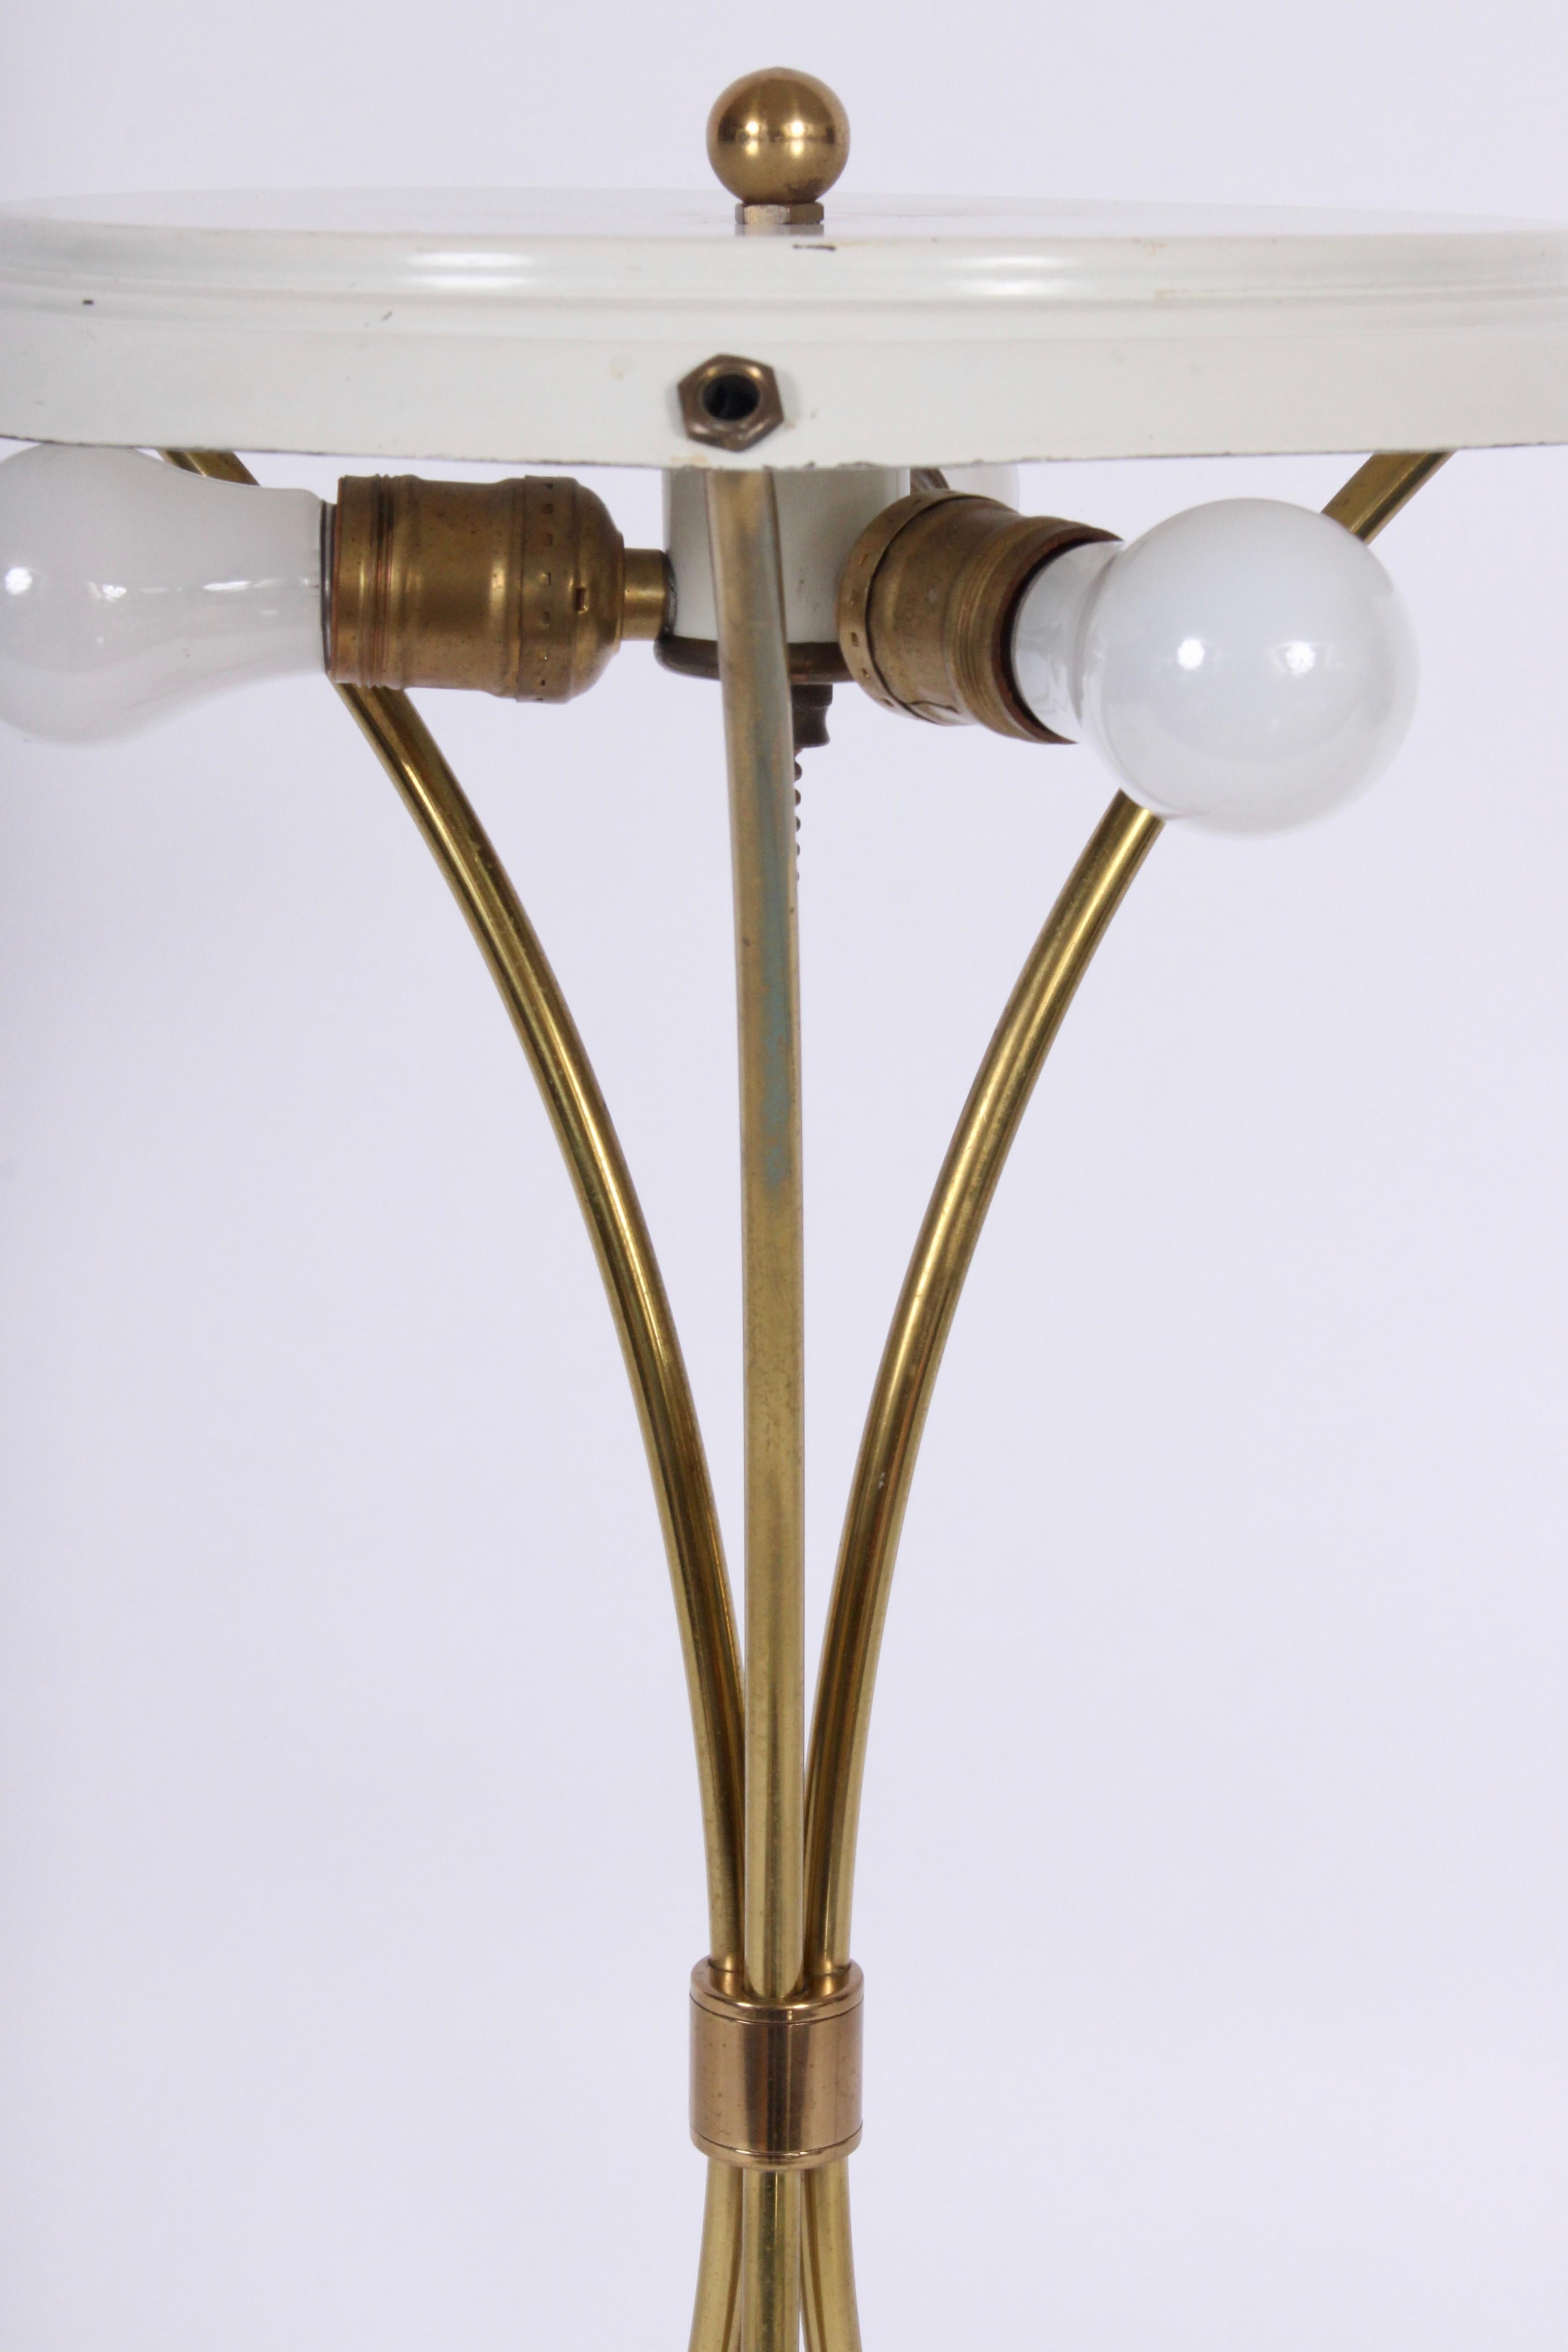 Plated Gerald Thurston Curved Brass Tripod Table Lamp with White Shade, circa 1950